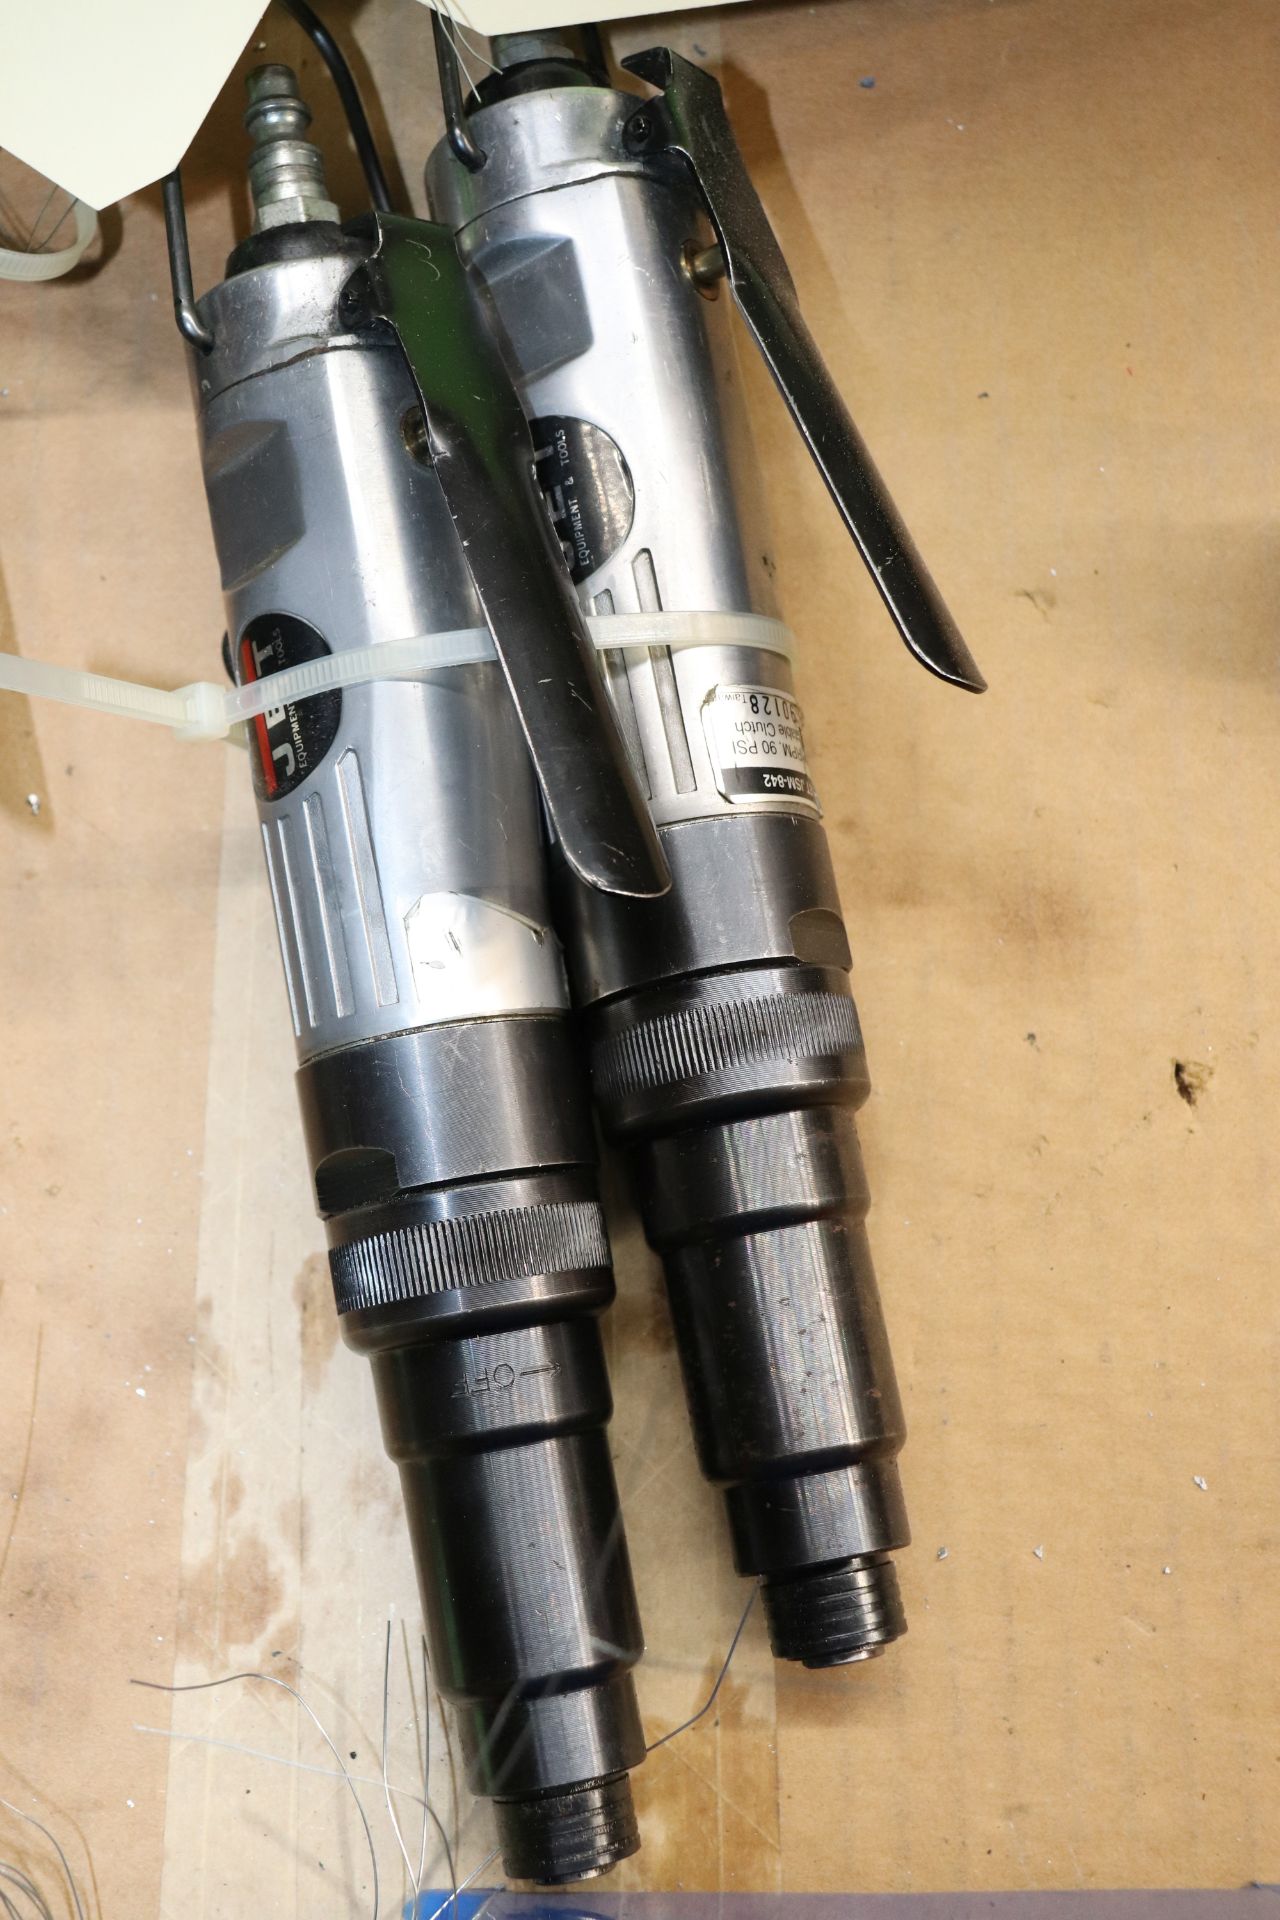 Two Jet impact drivers